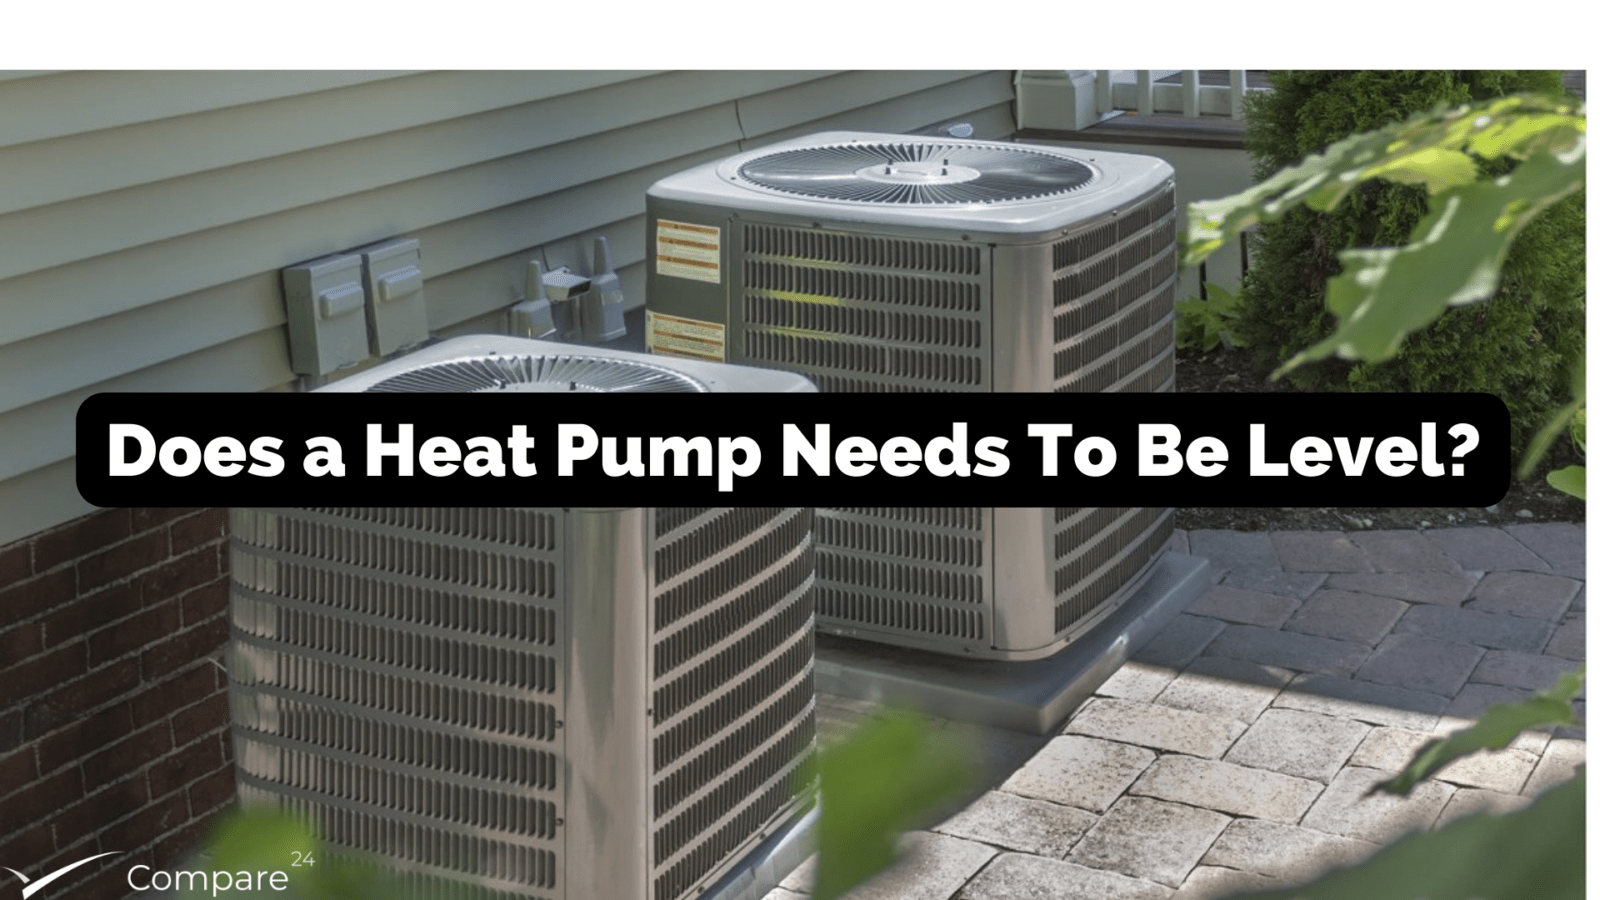 Does a heat pump need to be level